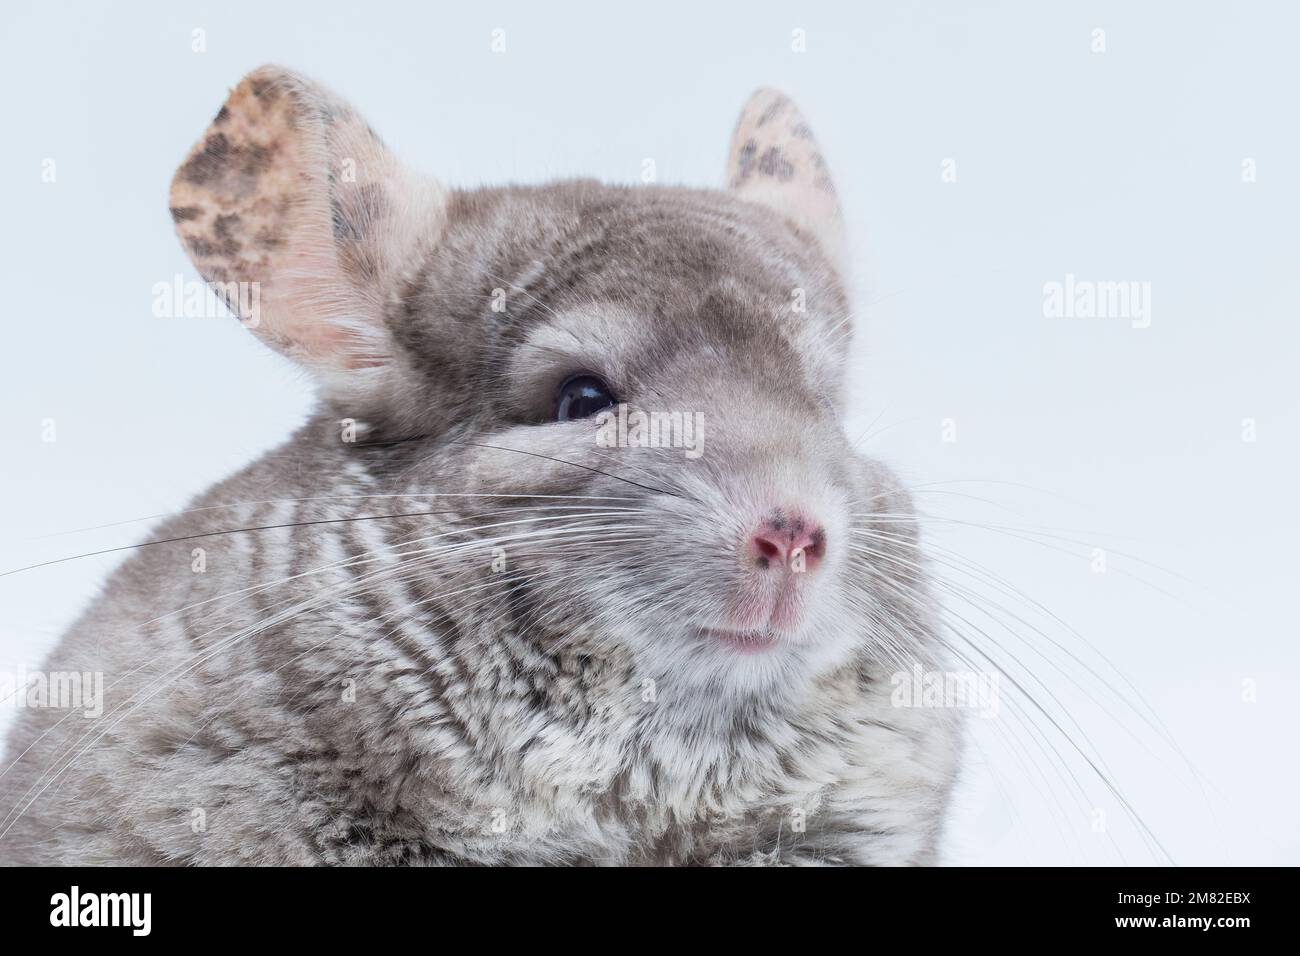 Chinchilla closeup isolated on white background. Home pet rodent animal. Stock Photo